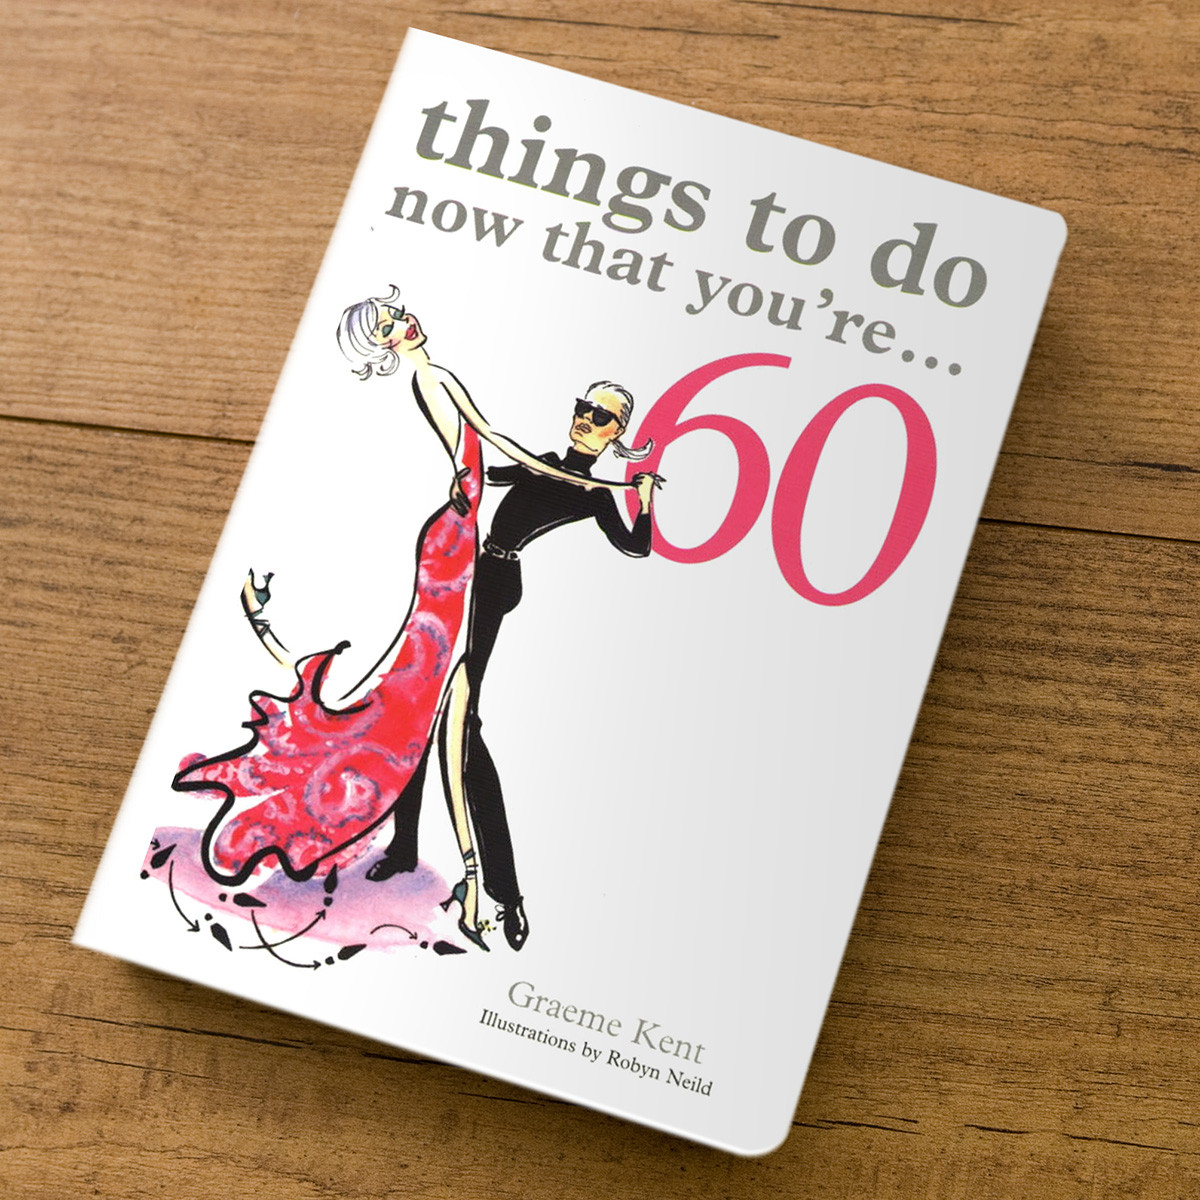 Traditional 60th Birthday Gifts
 Things To Do Now That You re 60 Gift Book 60th